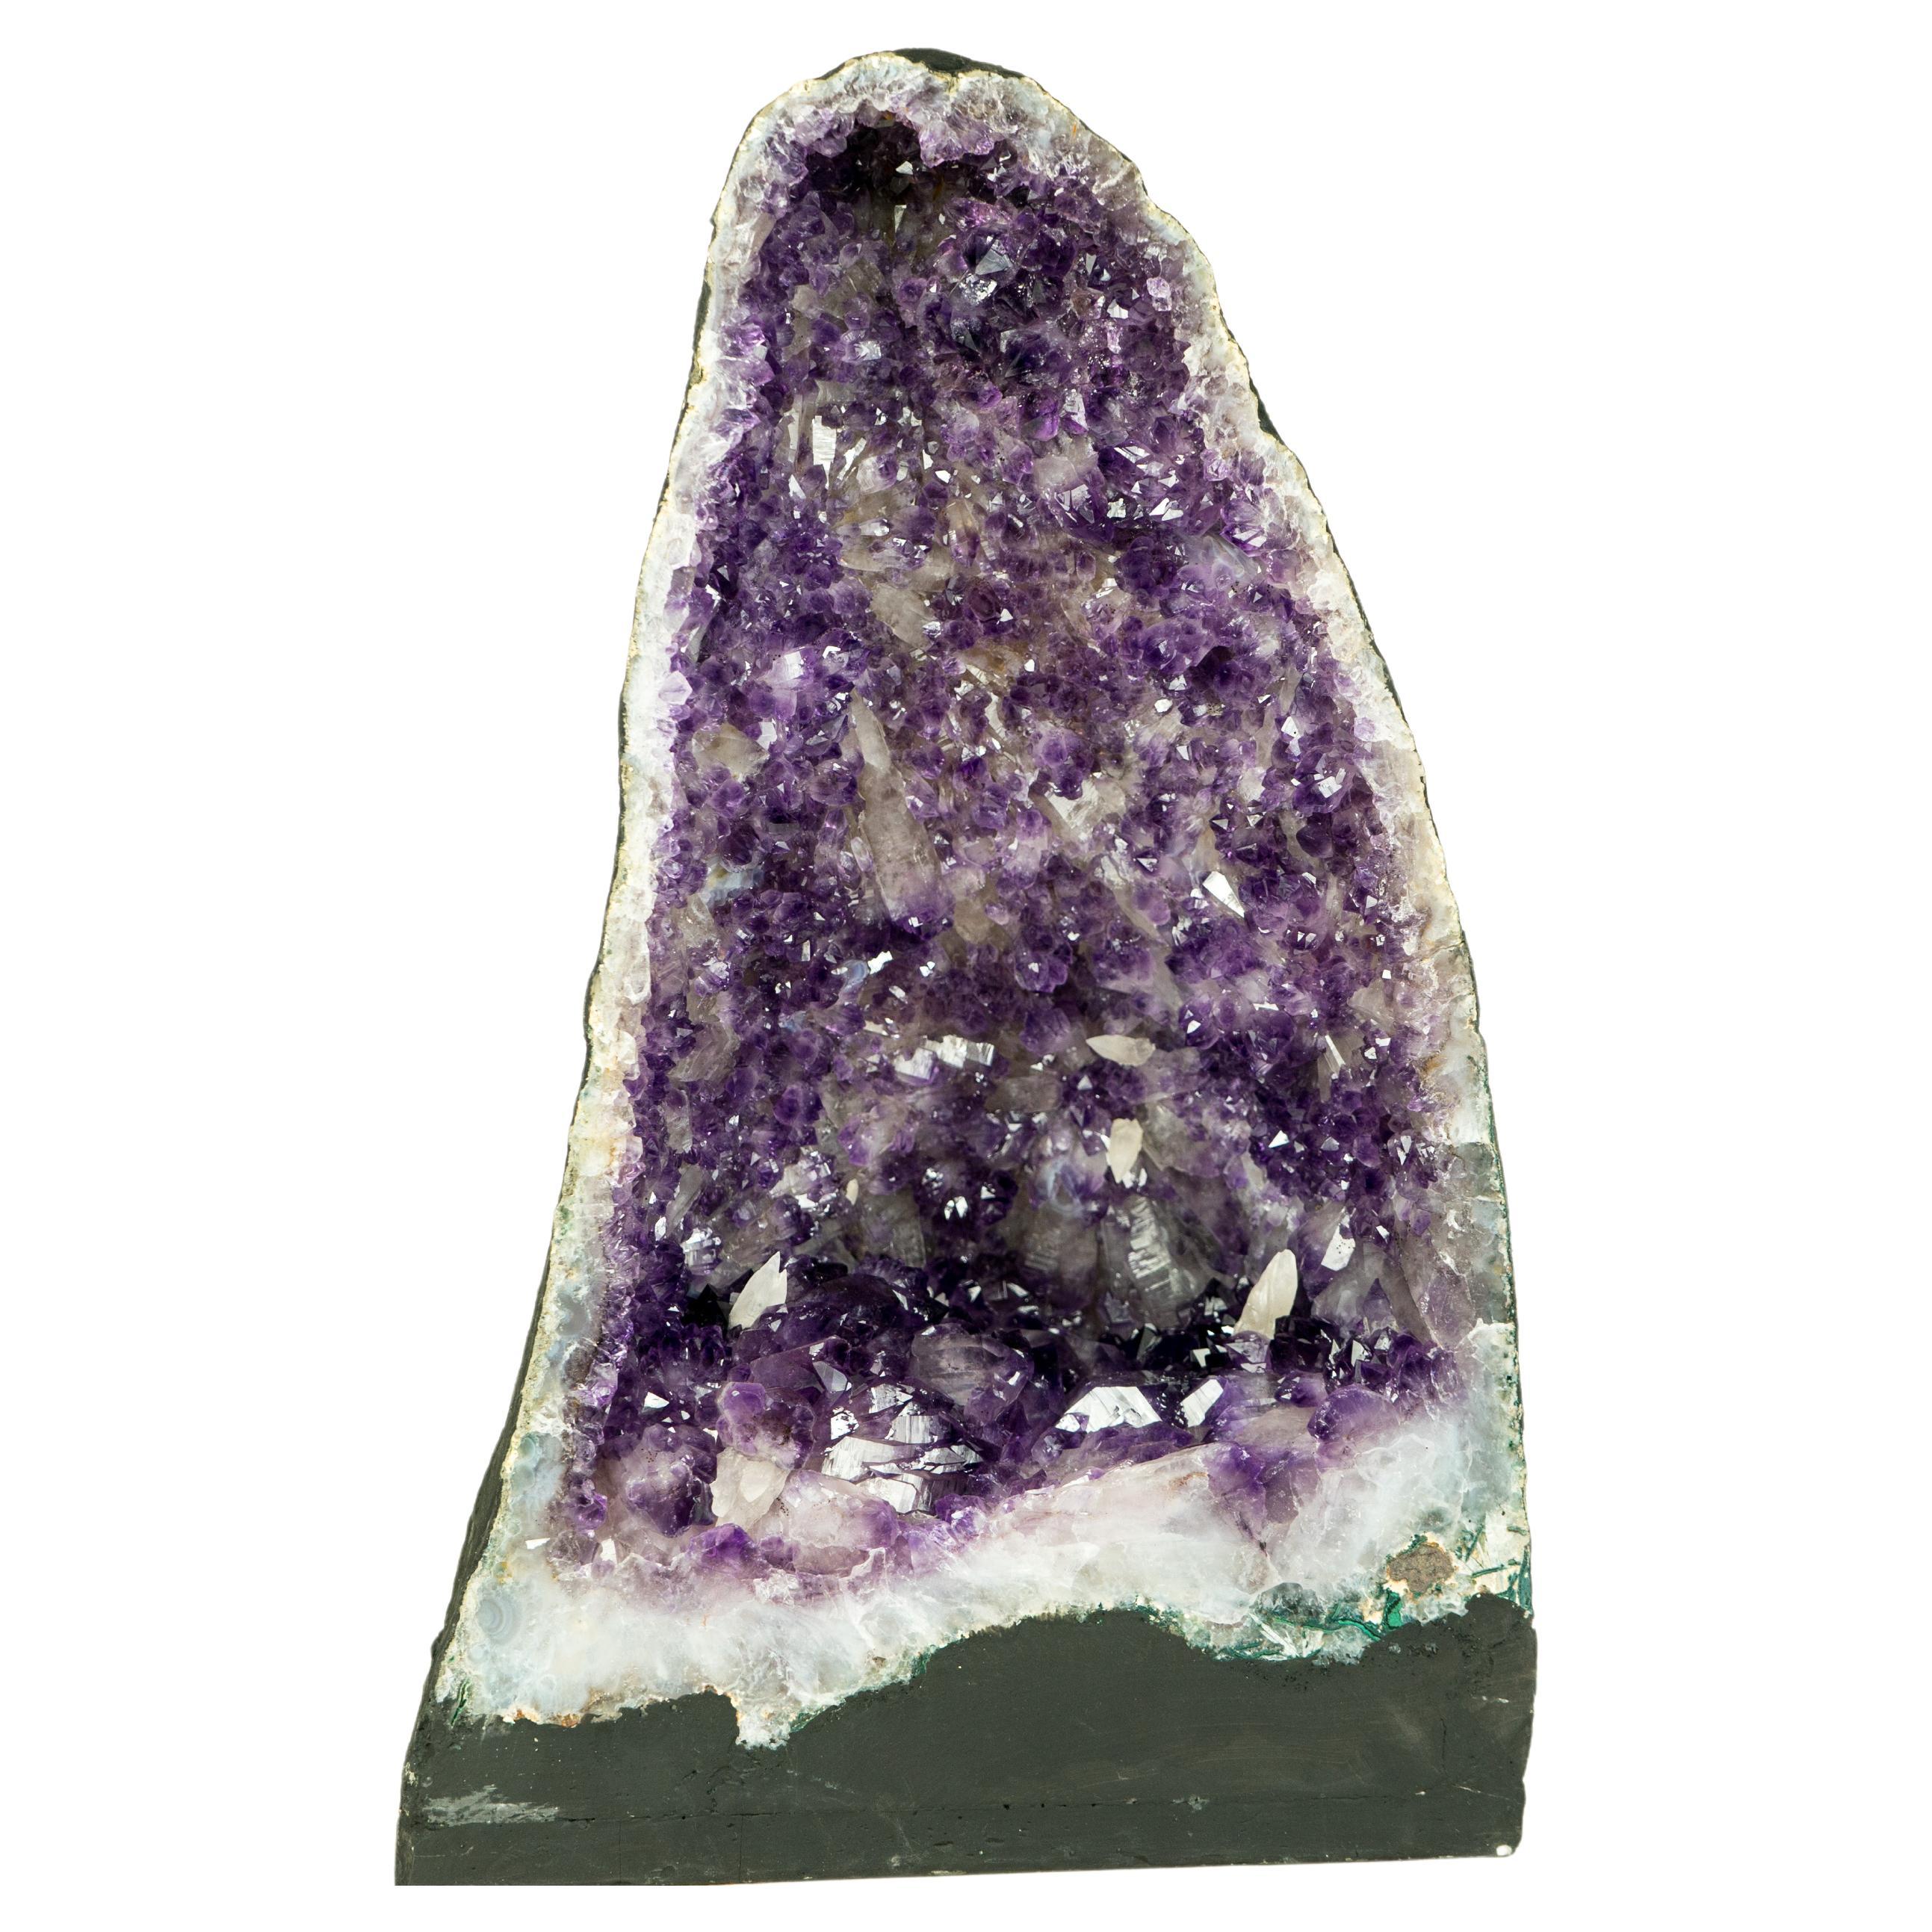 Purple Amethyst Geode with Rare Sparkly Flower-Like Druzy Formation and Calcite